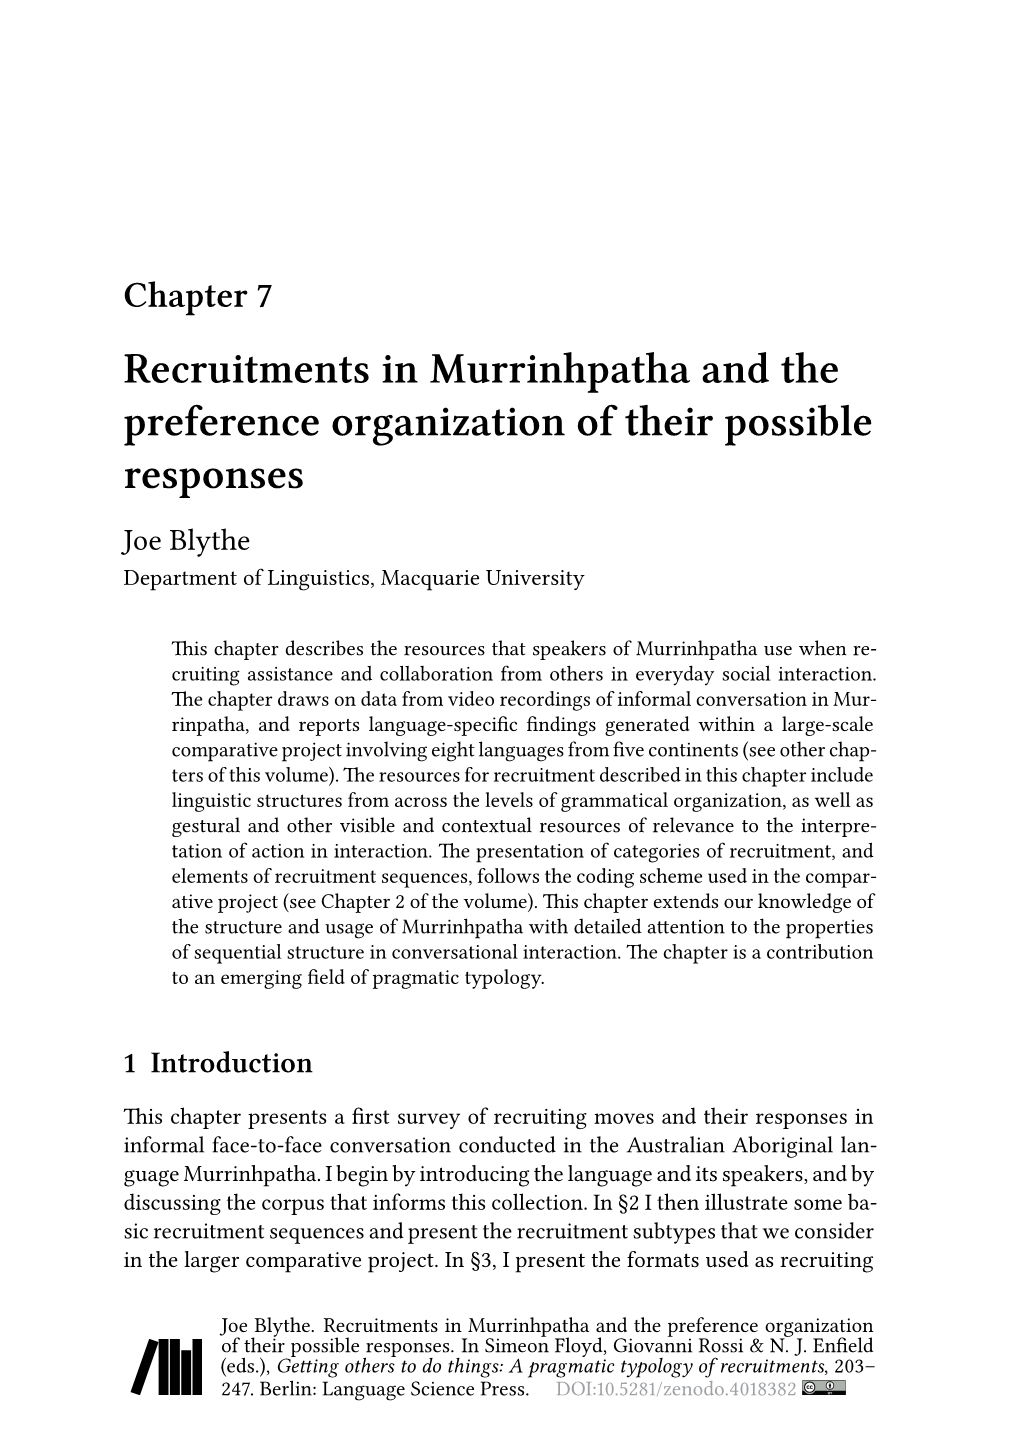 Recruitments in Murrinhpatha and the Preference Organization of Their Possible Responses Joe Blythe Department of Linguistics, Macquarie University